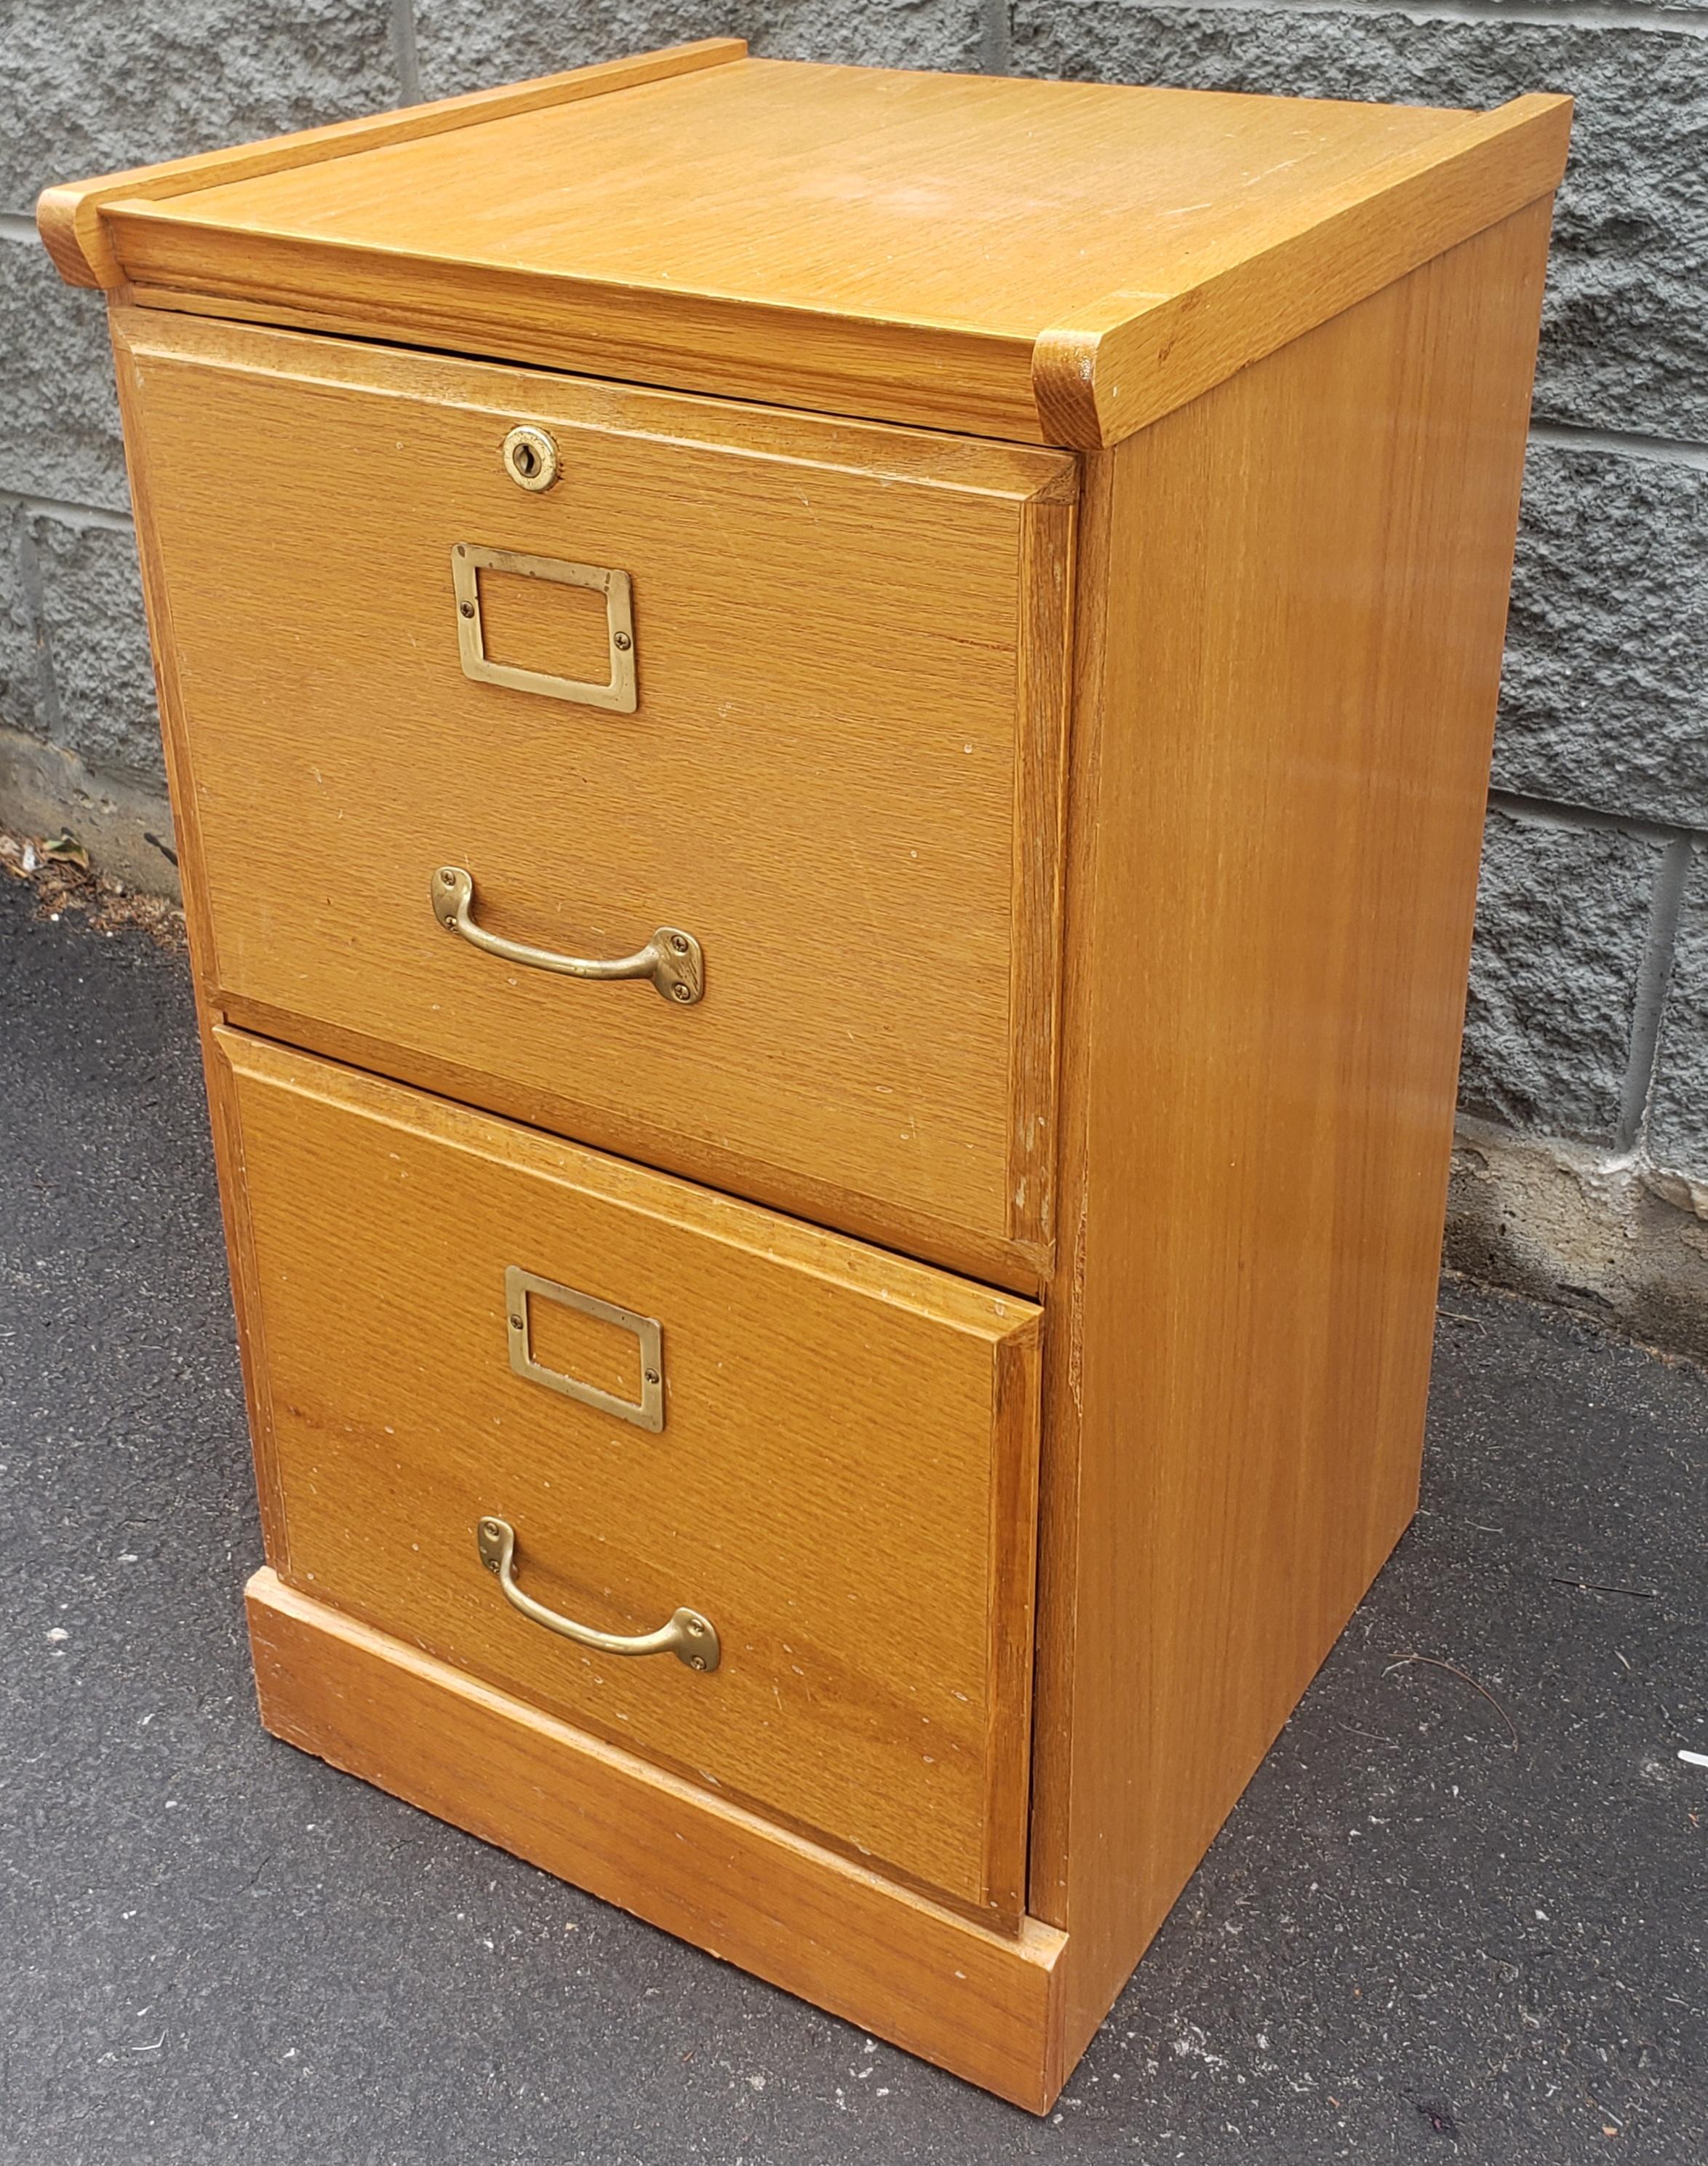 wooden file cabinet with lock